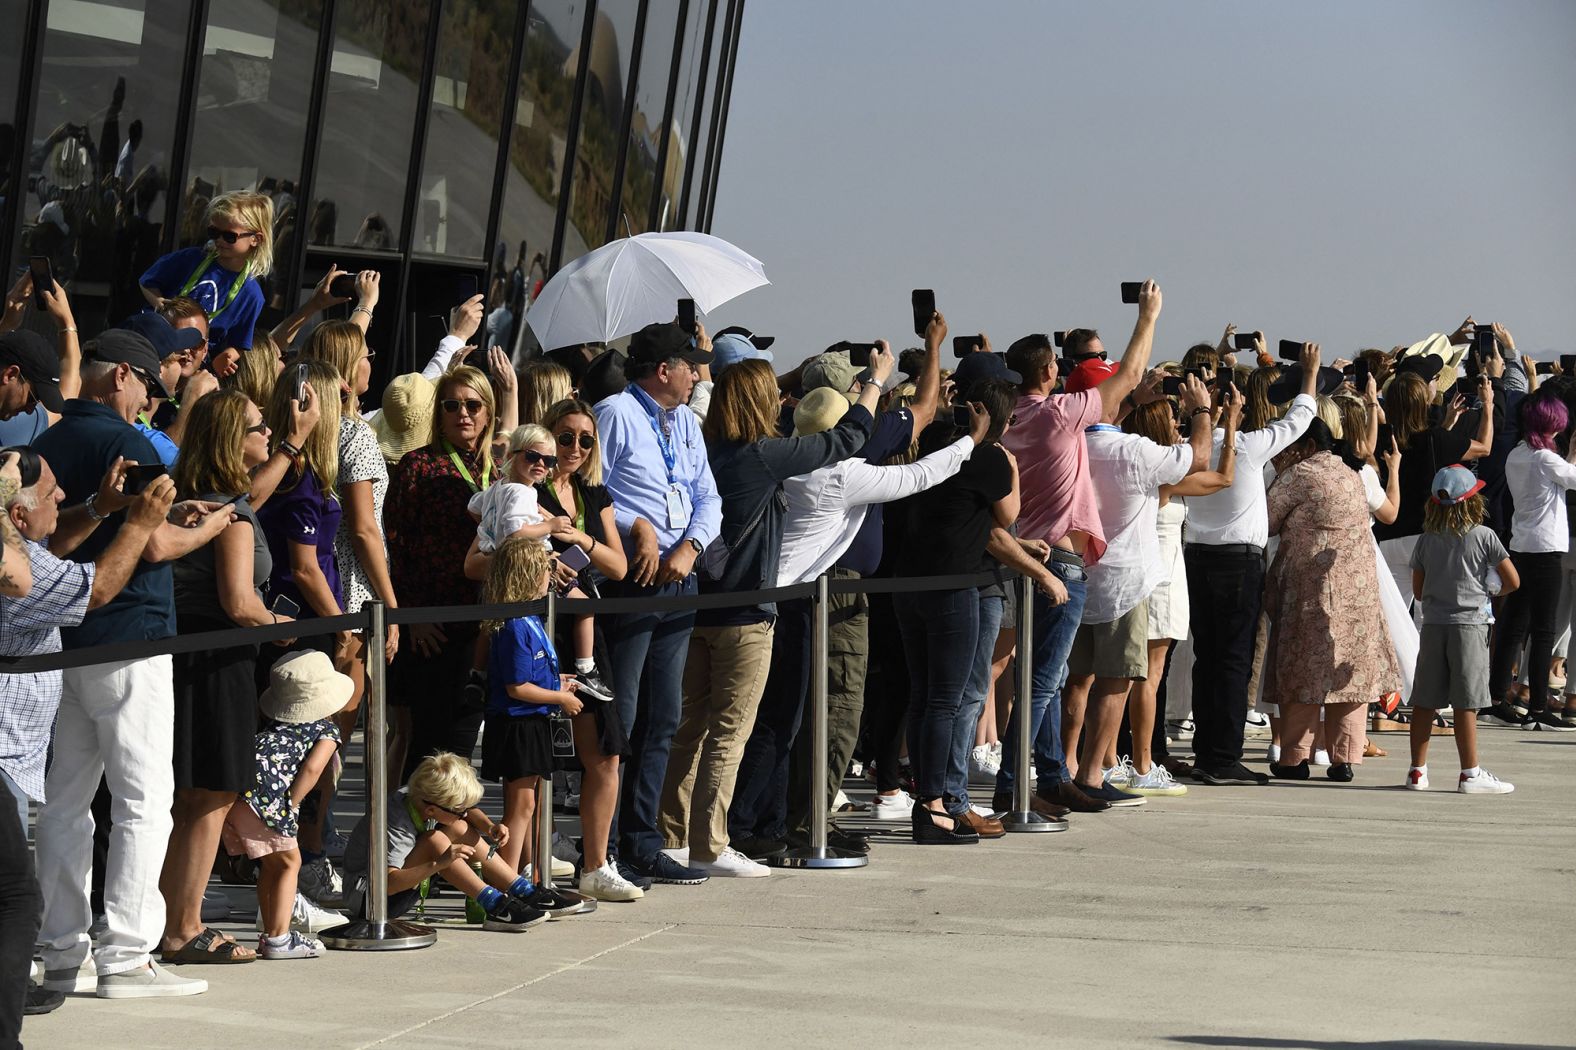 Spectators take photos and cheer as the Virgin Galactic space plane takes off.